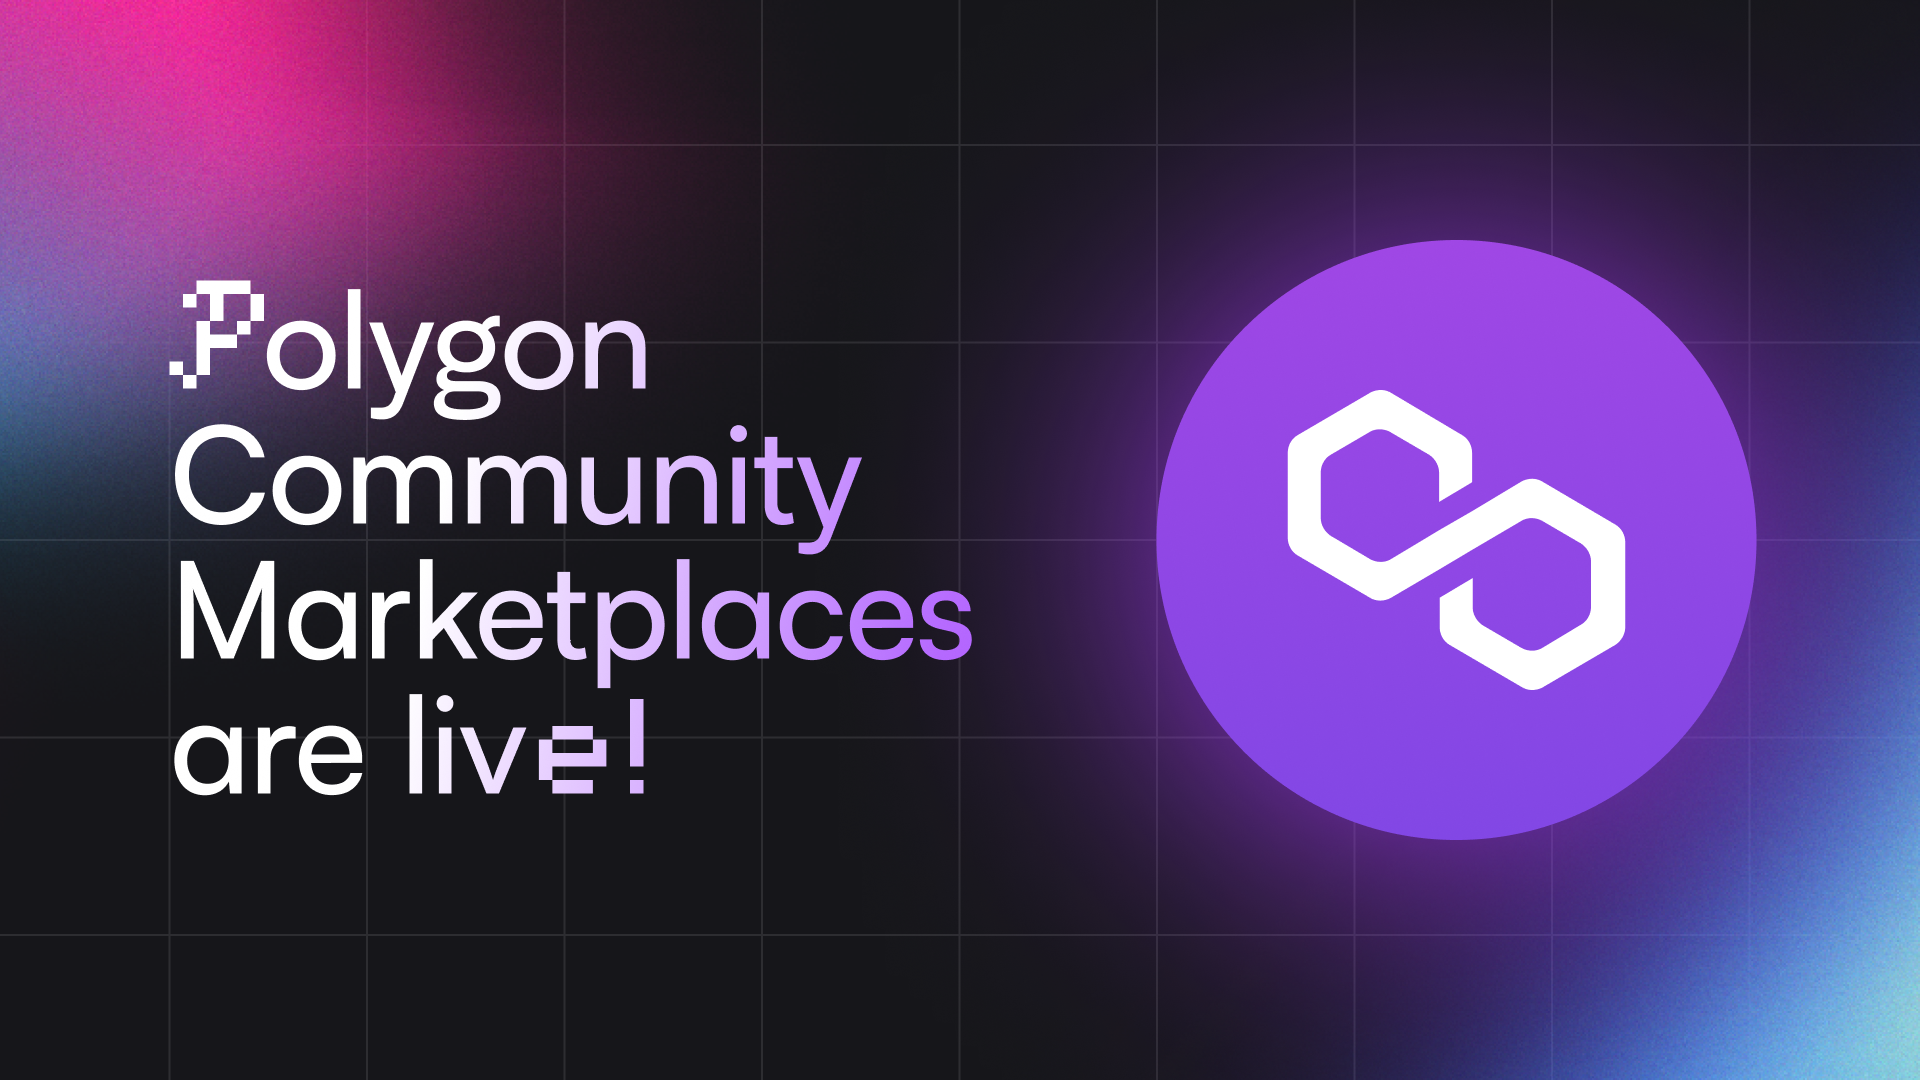 How to create your own Polygon Community Marketplace in a few clicks